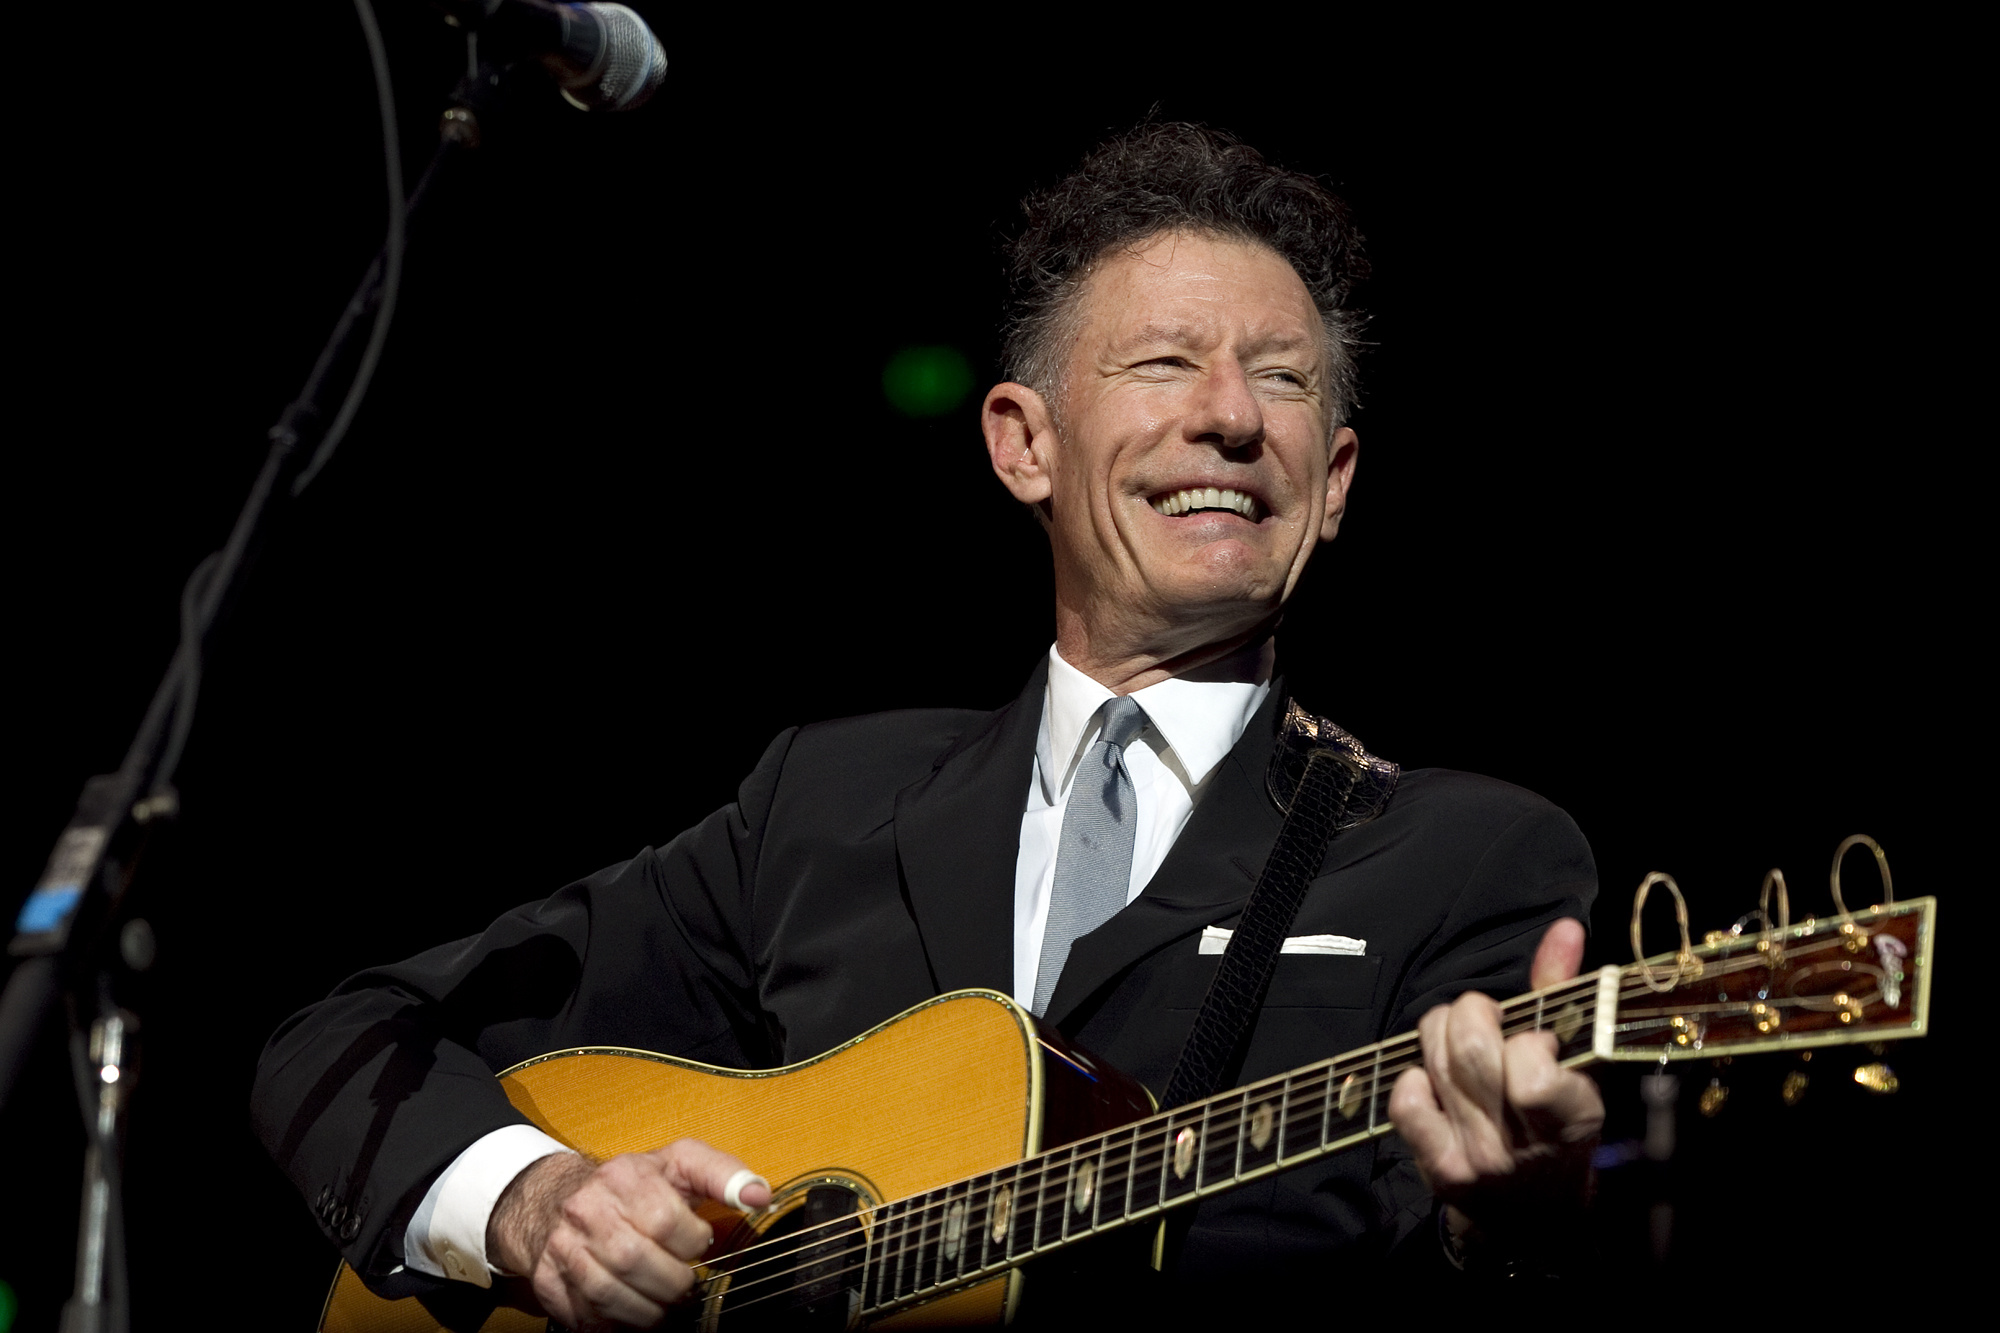 Lyle Lovett music, HQ wallpapers, 4K pictures, Music icon, 2000x1340 HD Desktop